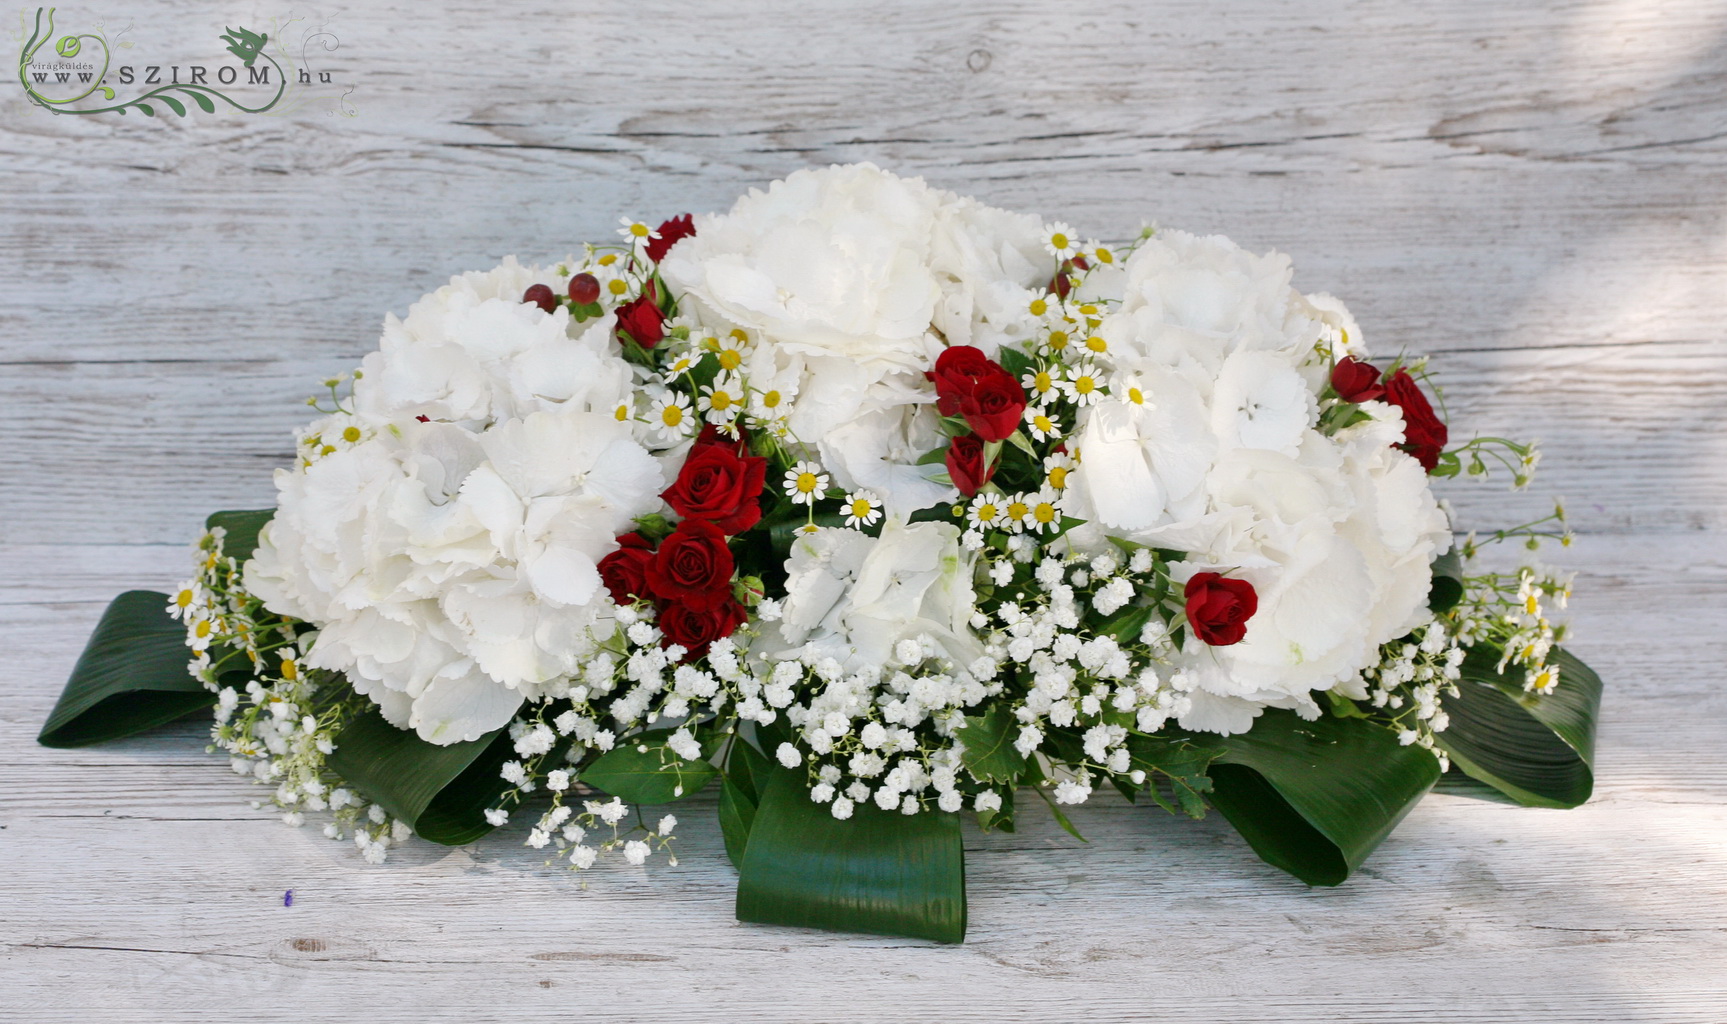 flower delivery Budapest - Main table centerpiece  (hydrangea, spray rose, chamomile, red, white), wedding